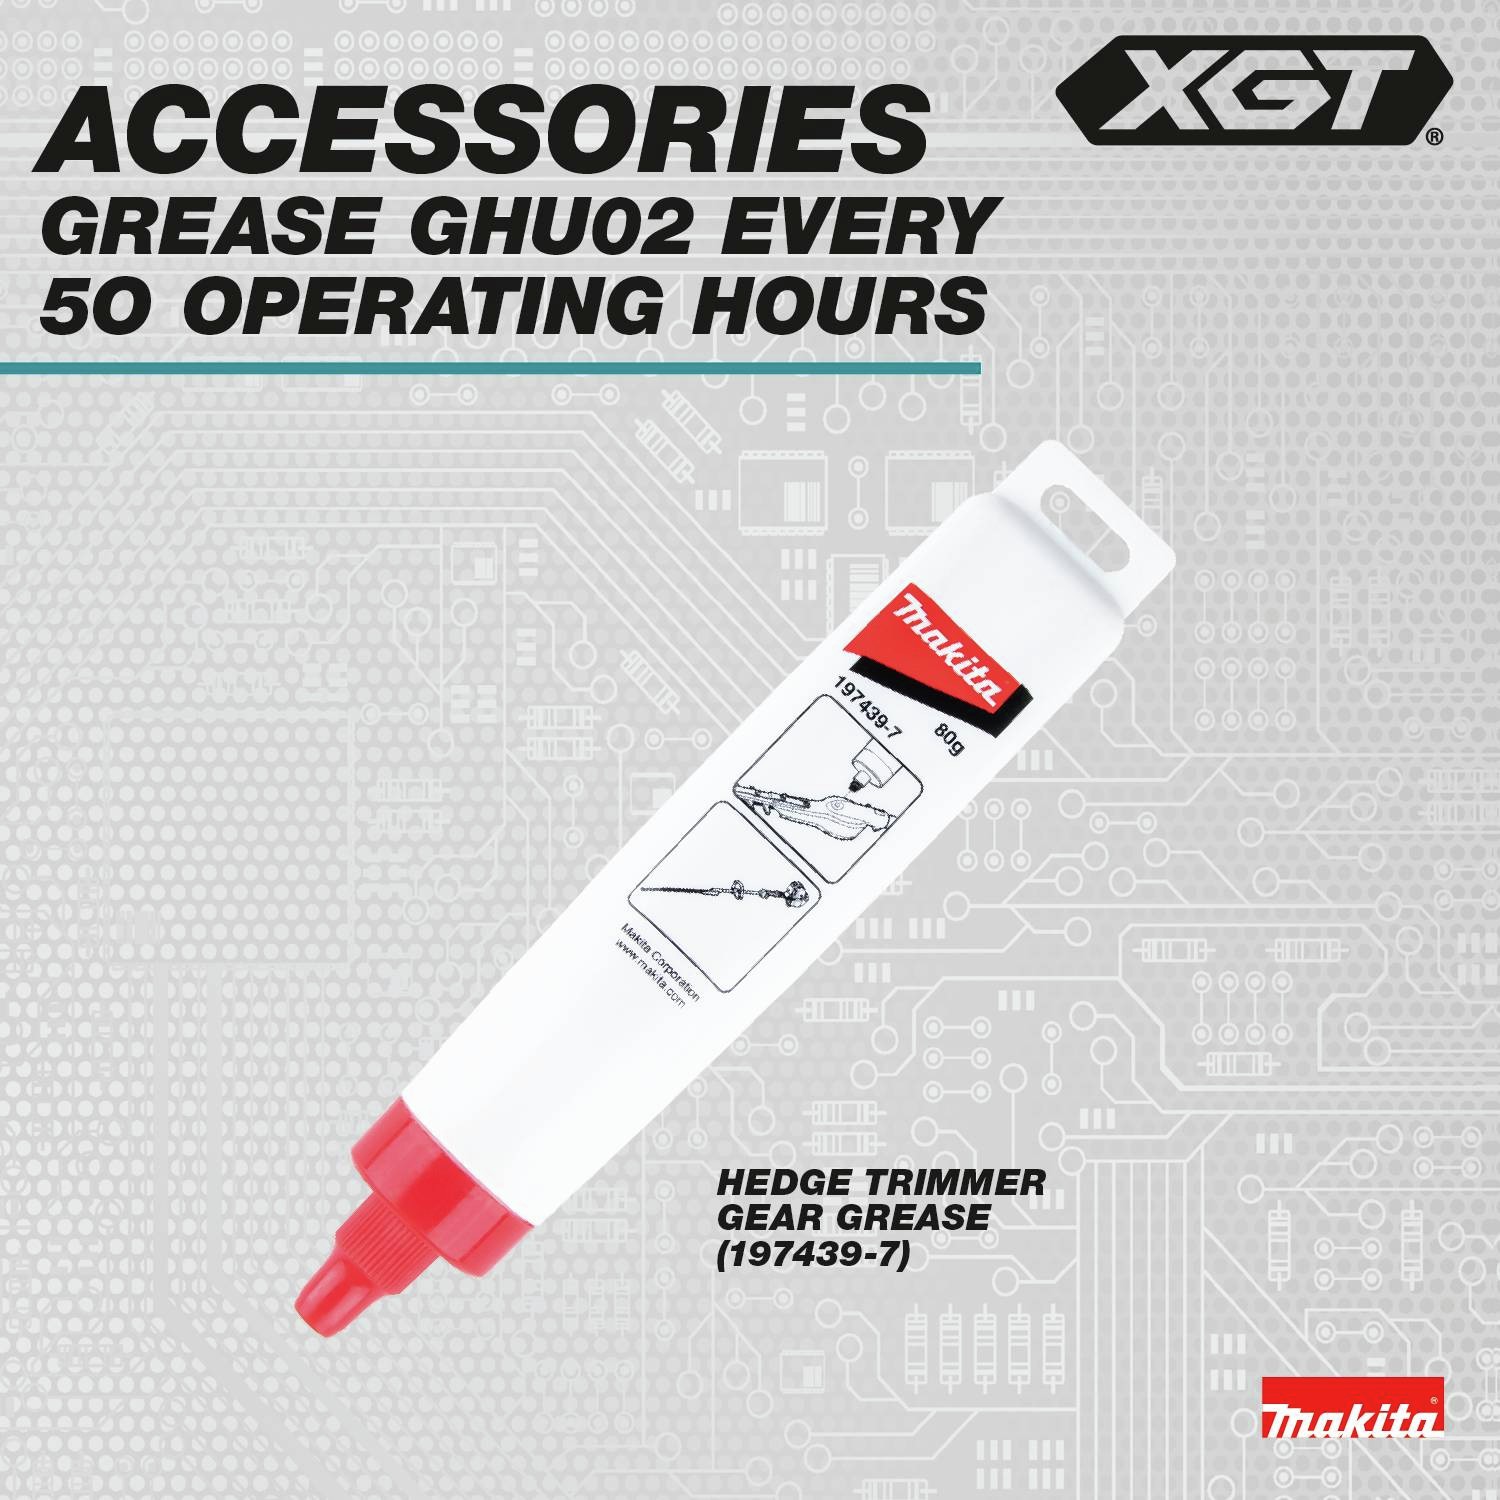 Accessory: Grease GHU02 every 50 operating hours